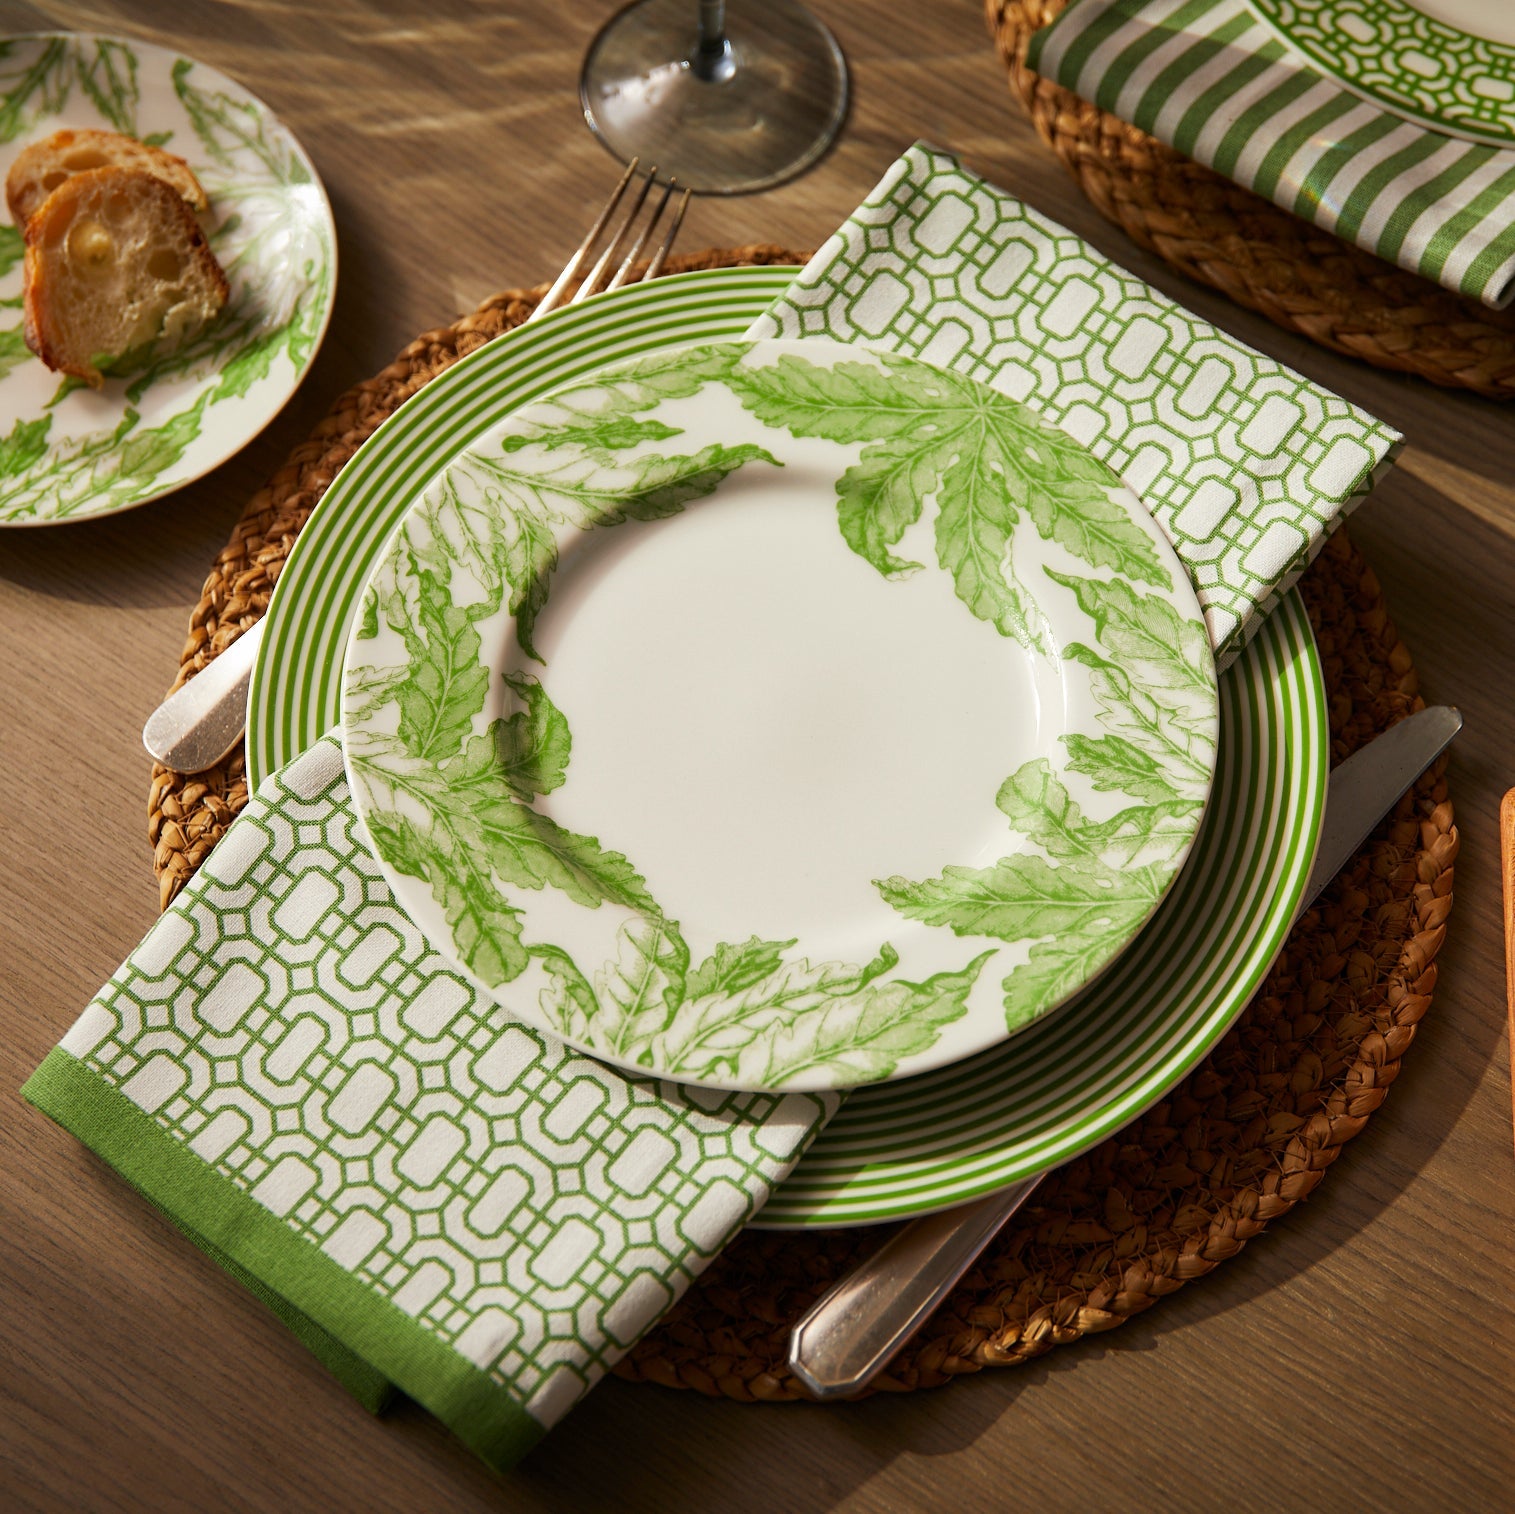 Newport Garden Gate Oversized Dinner Napkins in Bright Spring Green, sold as a set of 4 made from 100% cotton from Caskata